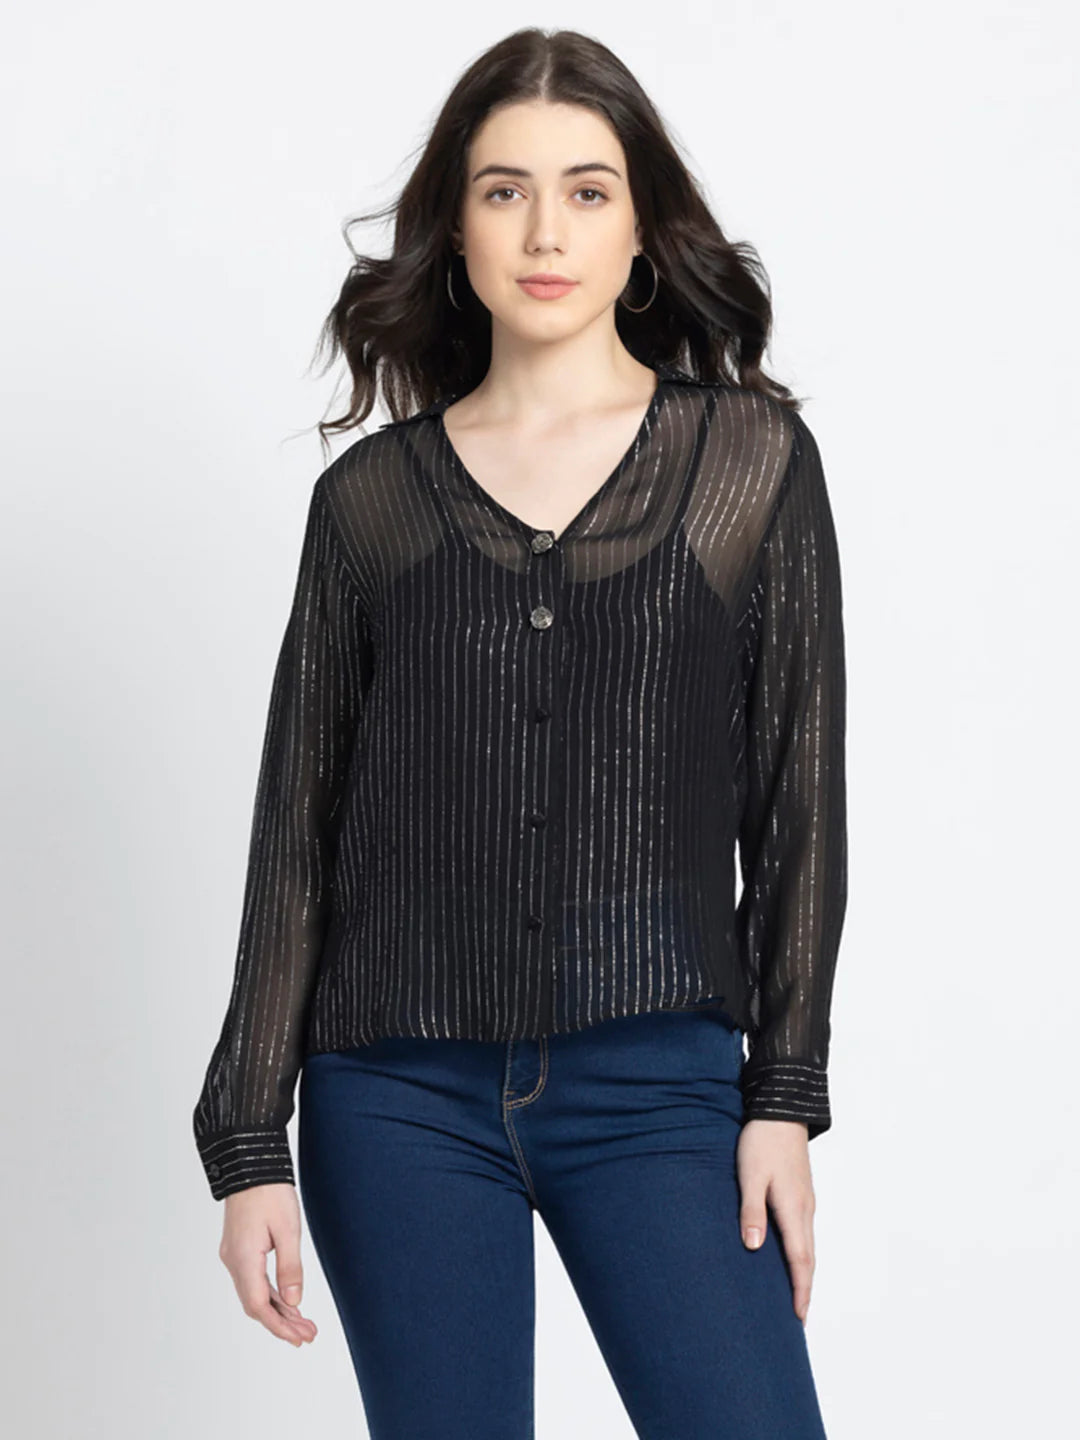 Black Party Shirt for Women | Embroidered Black Party Shirt